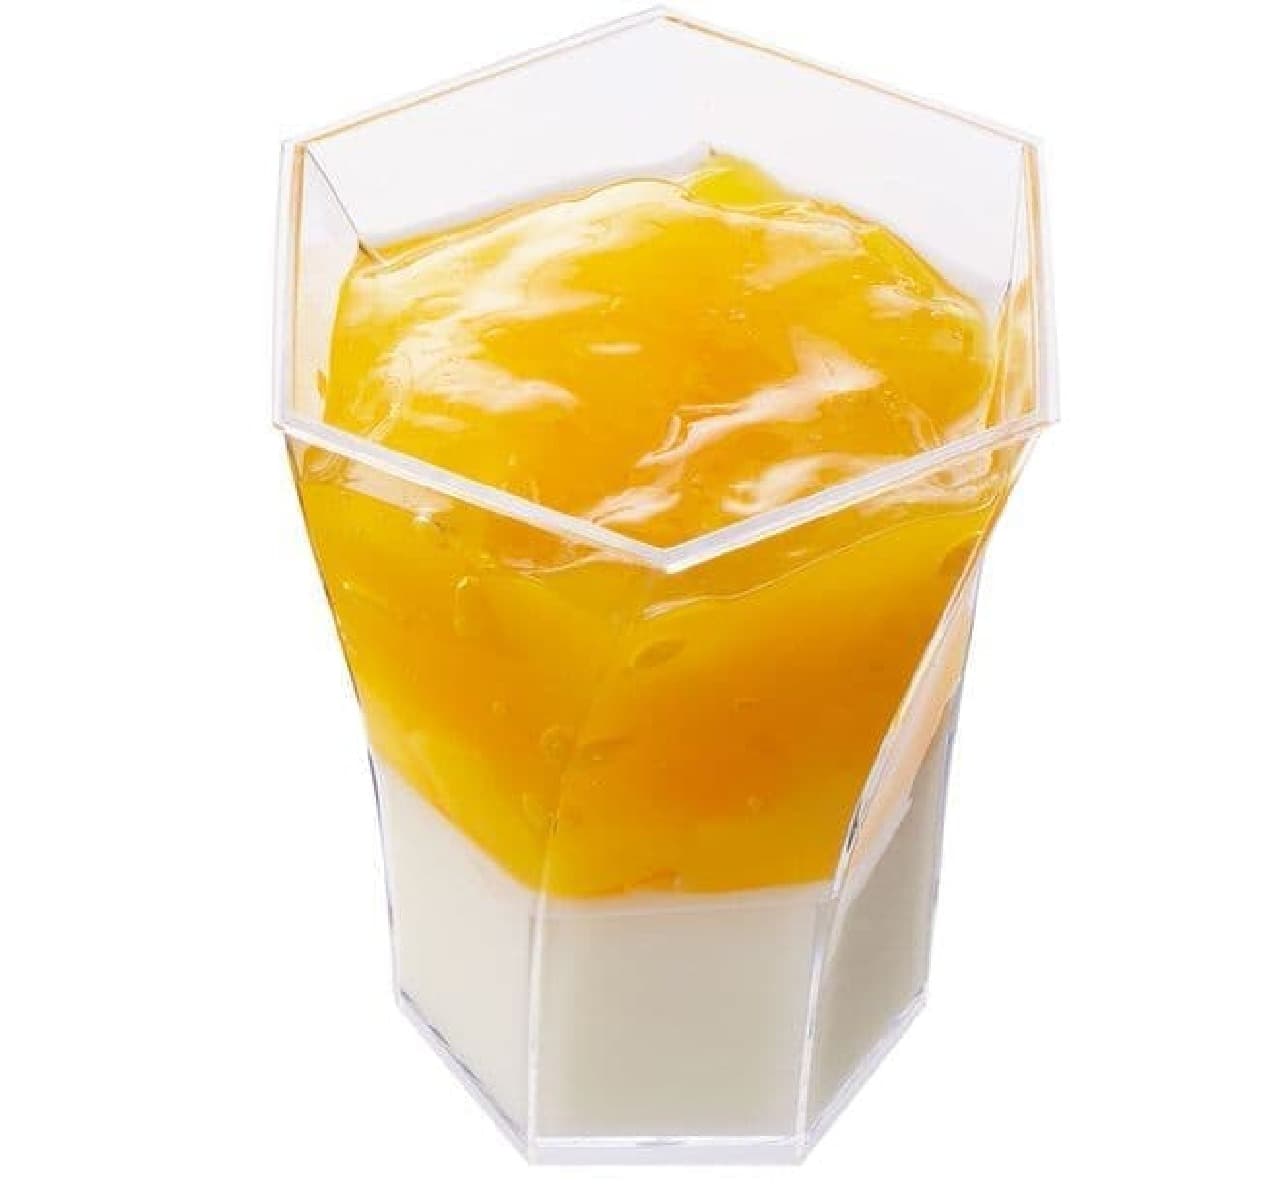 "W Jelly" is a summer-only cup dessert with two types of jelly.